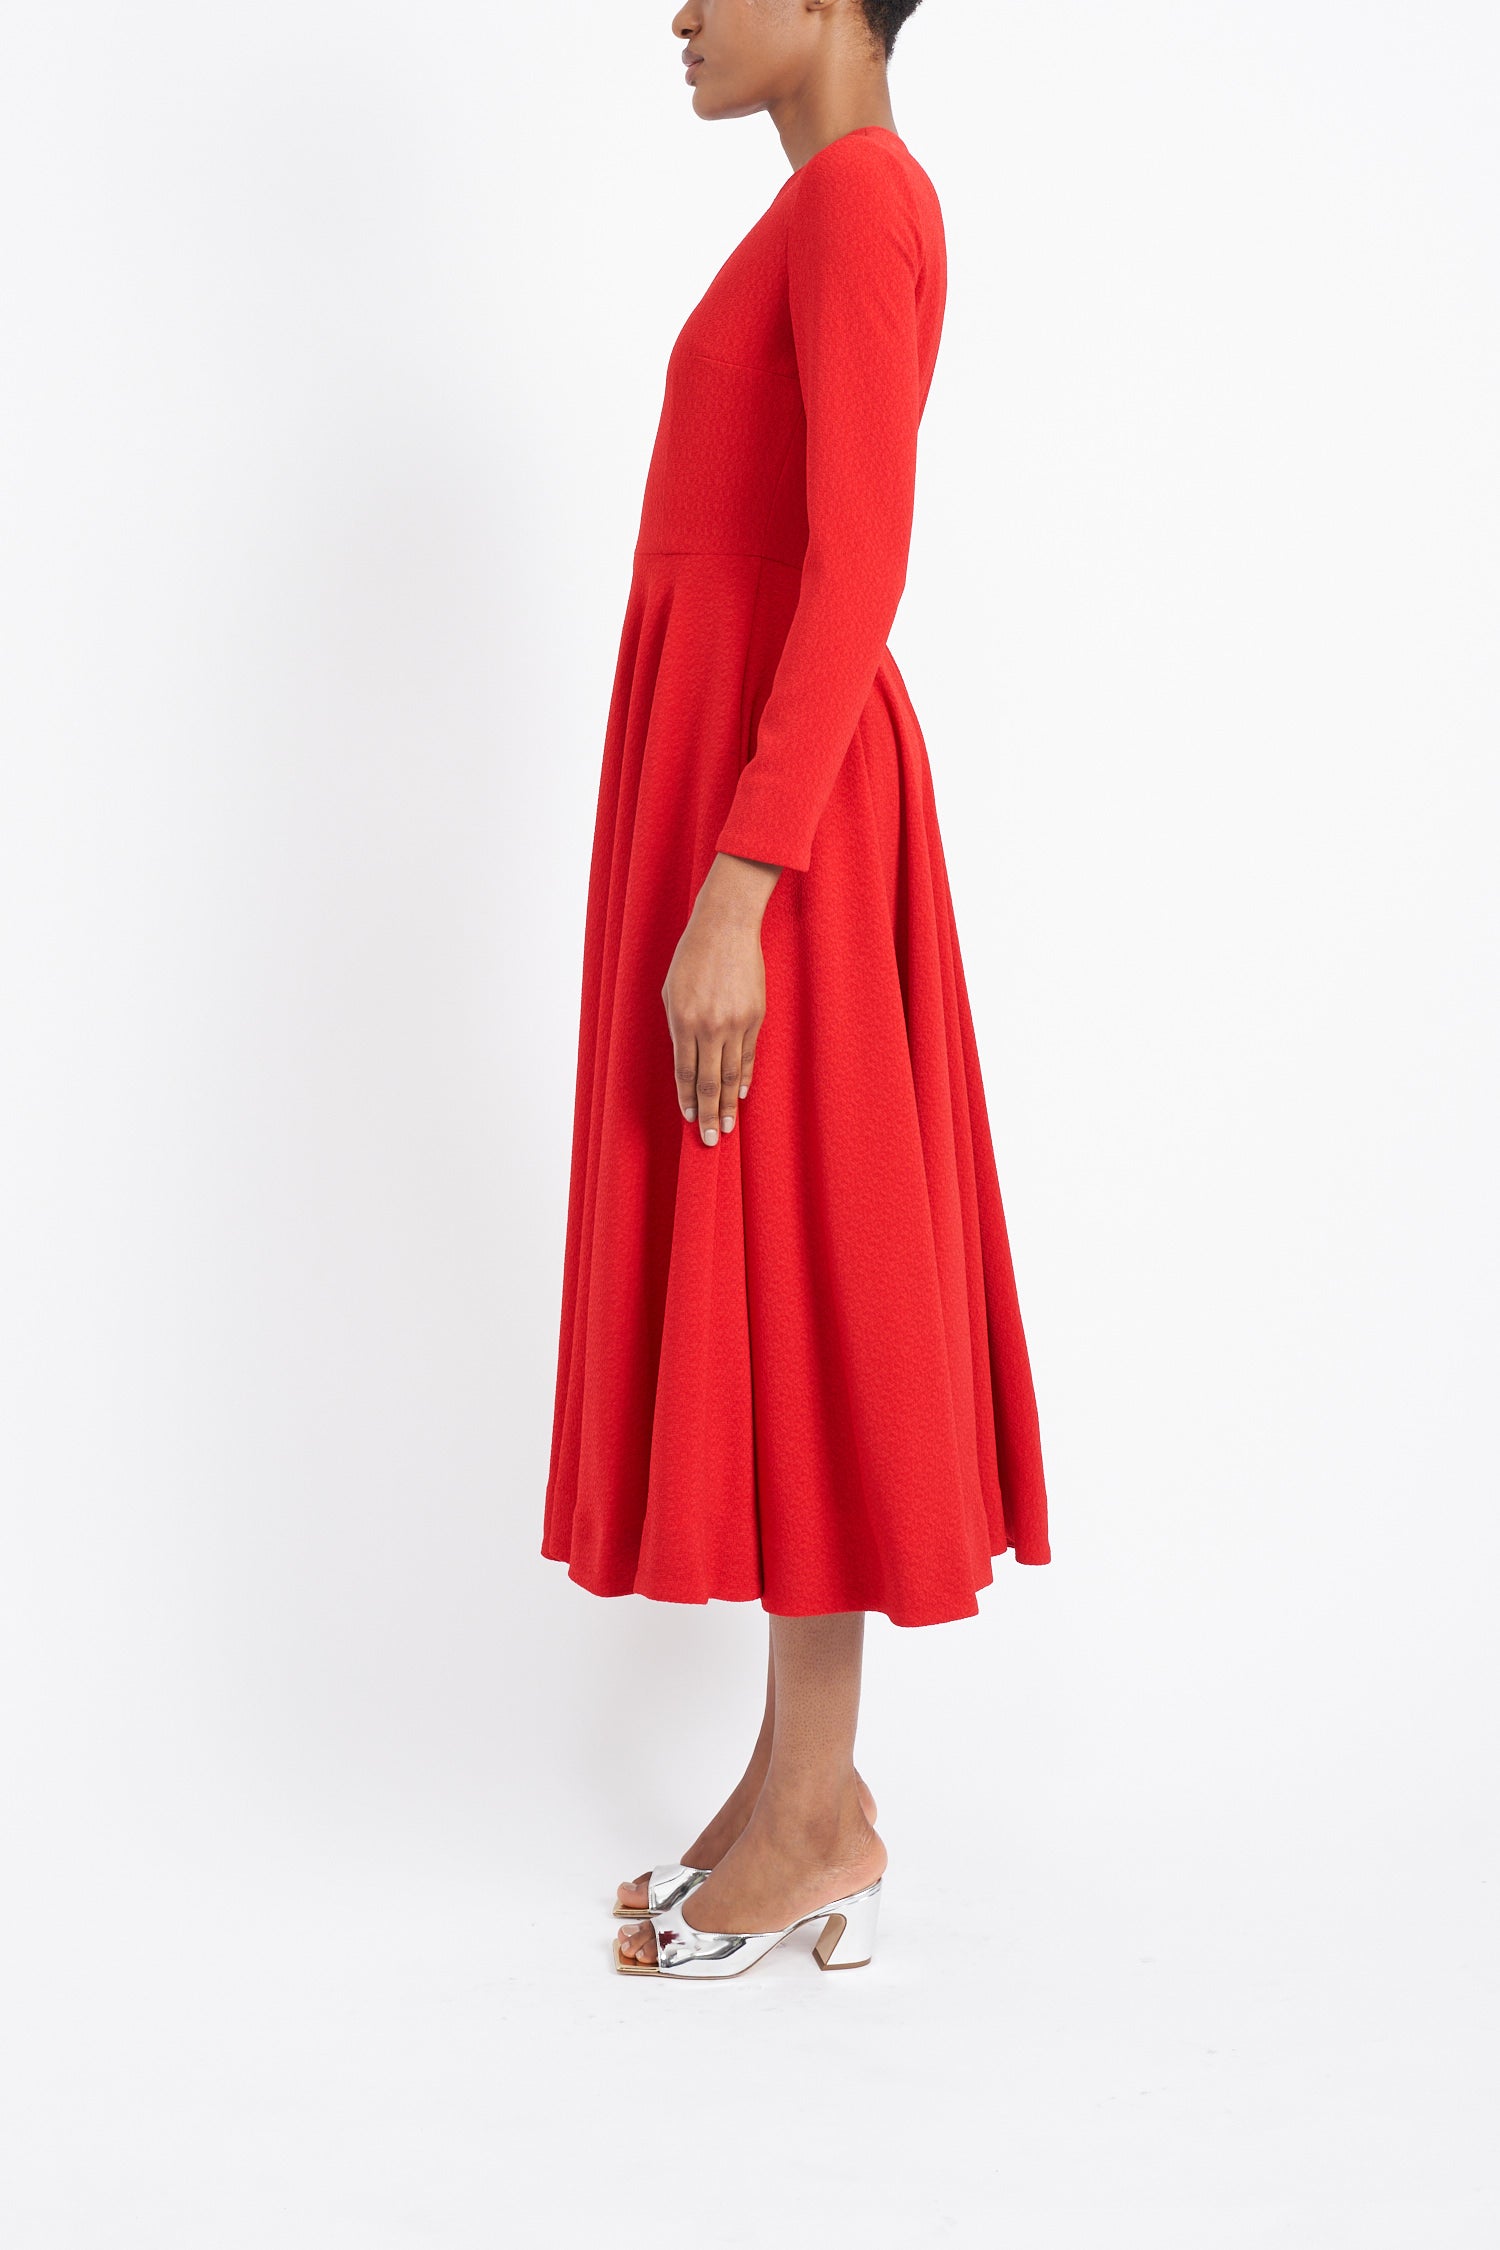 CASS RED SUSTAINABILY SOURCED CADY DRESS